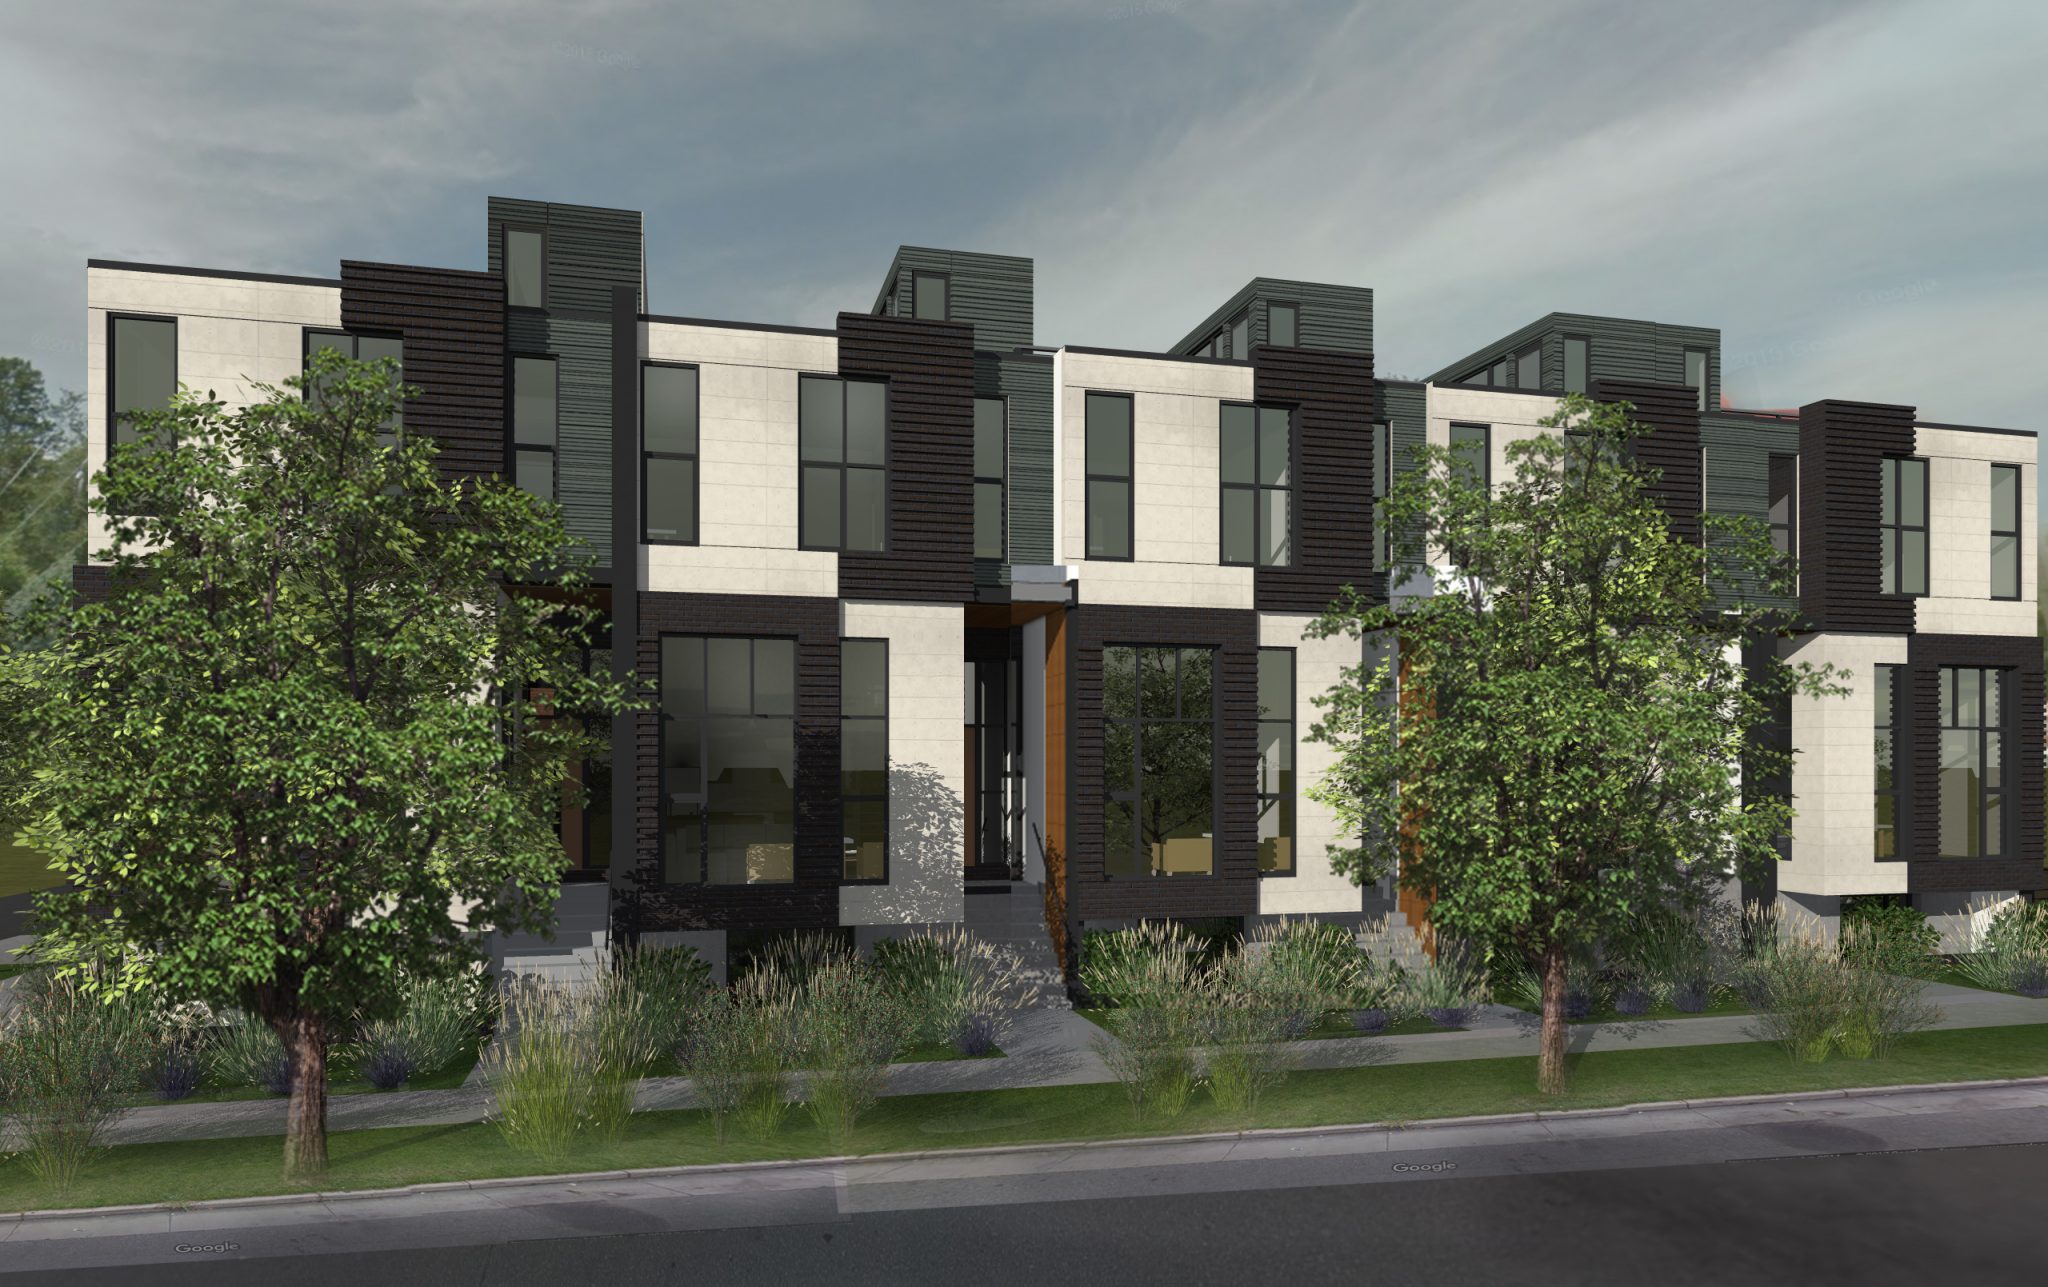 Evans and Milwaukee town homes - Residential